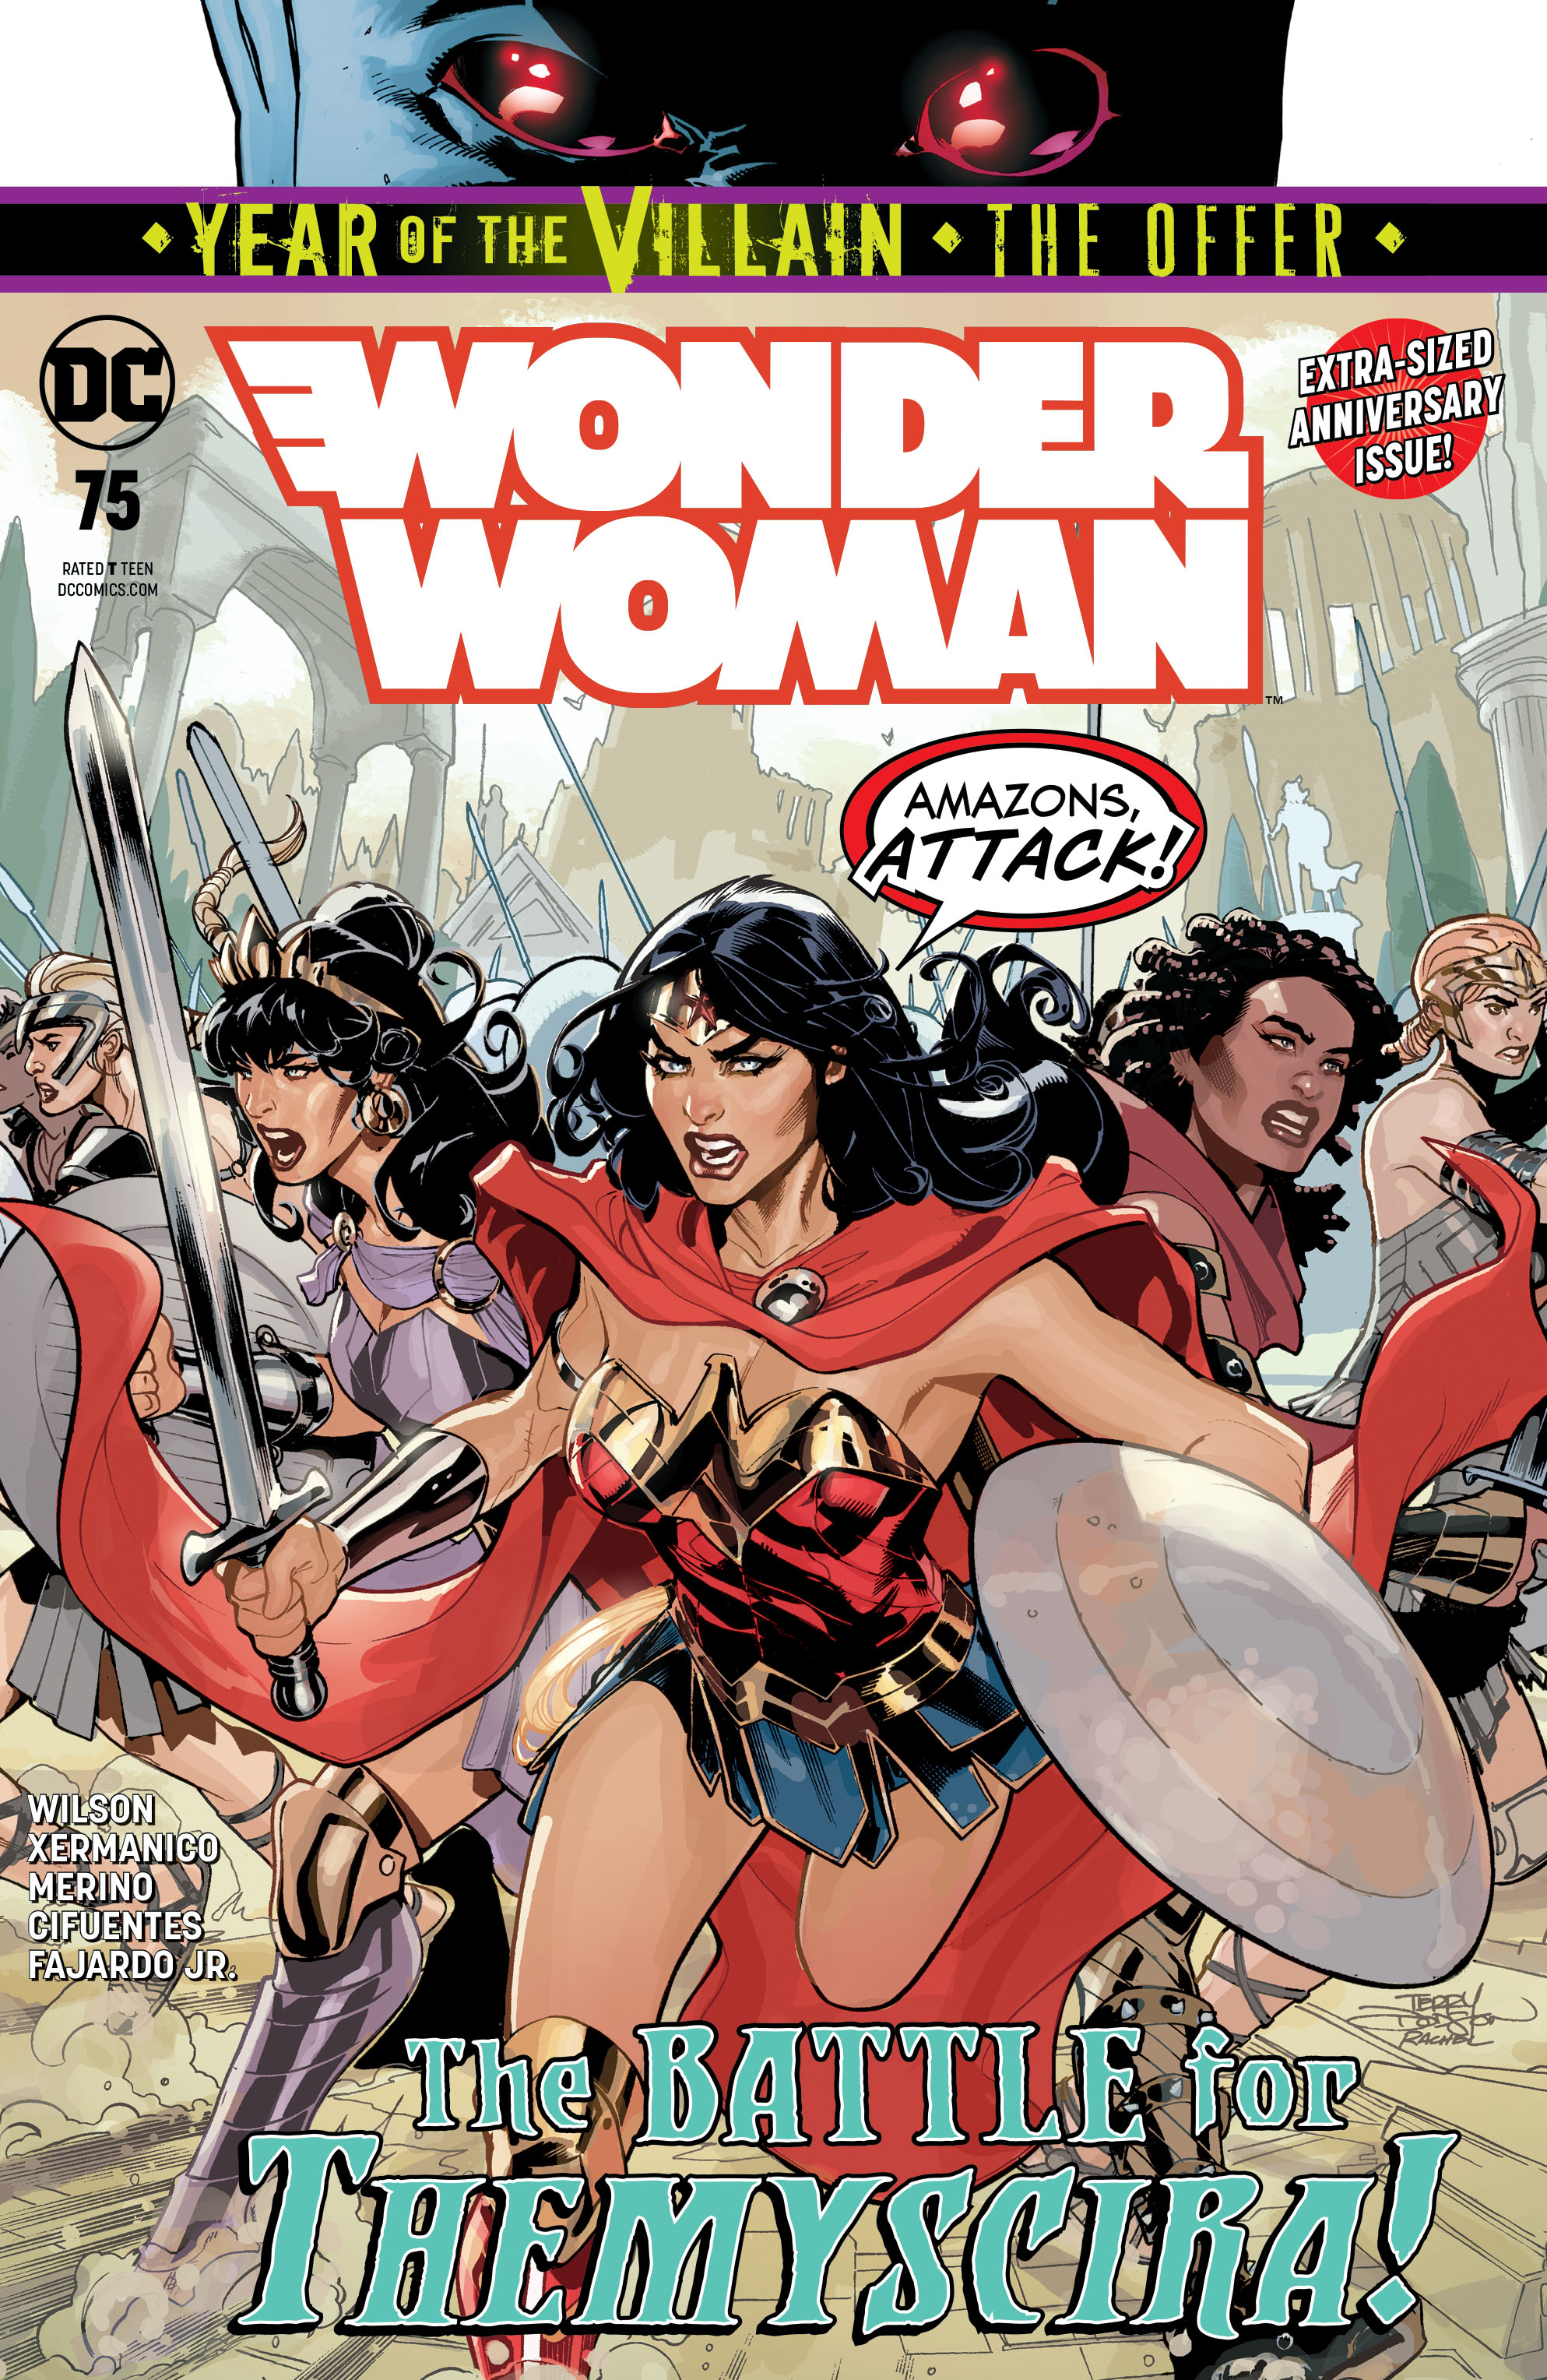 Wonder Woman #75 Year of the Villain The Offer (2016)